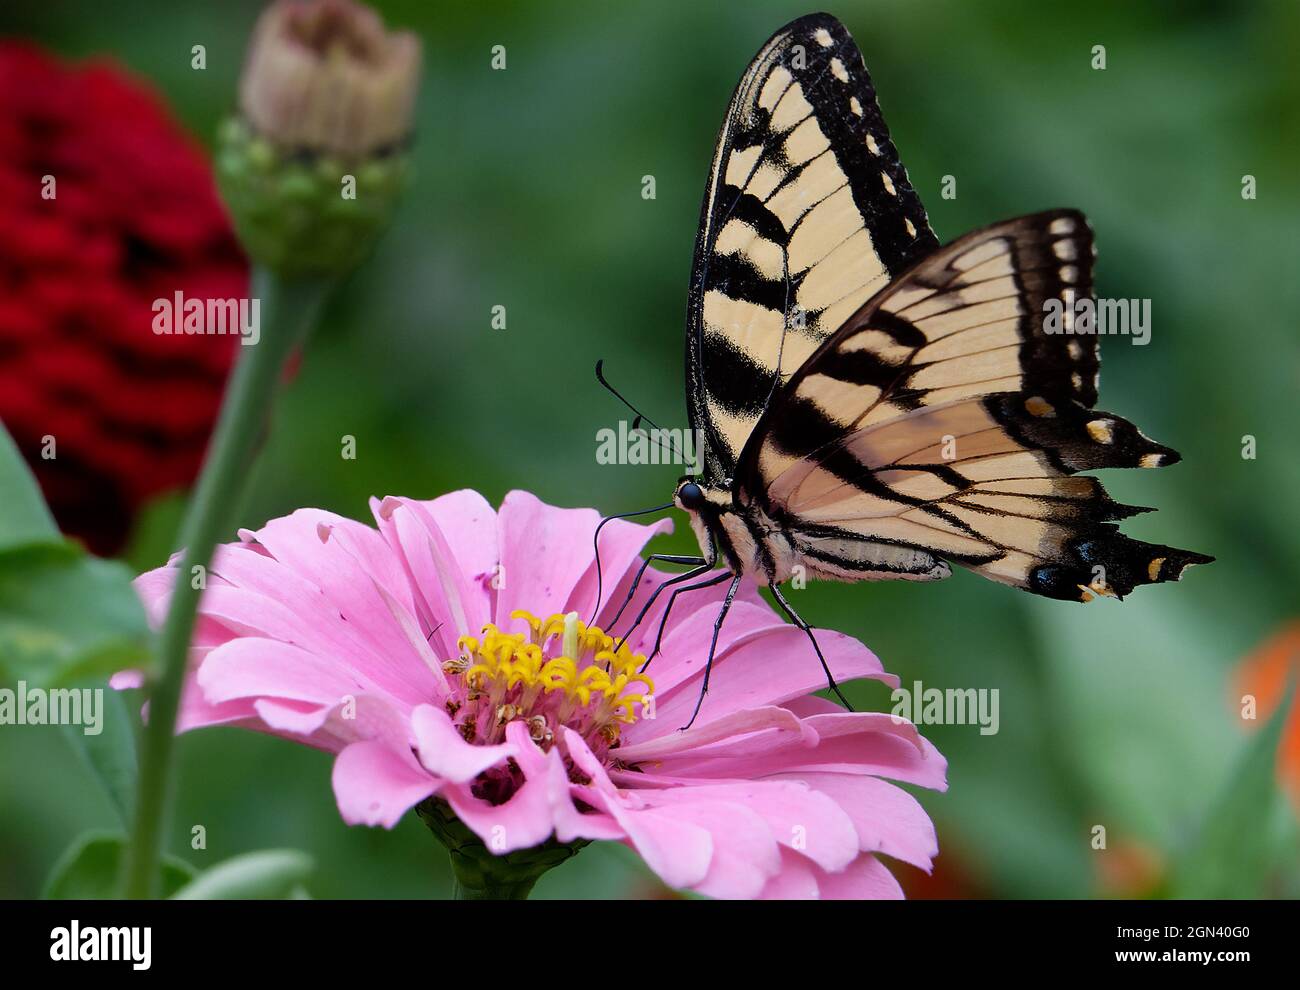 Close up of a Monarch butterfly pollinating a flower Stock Photo